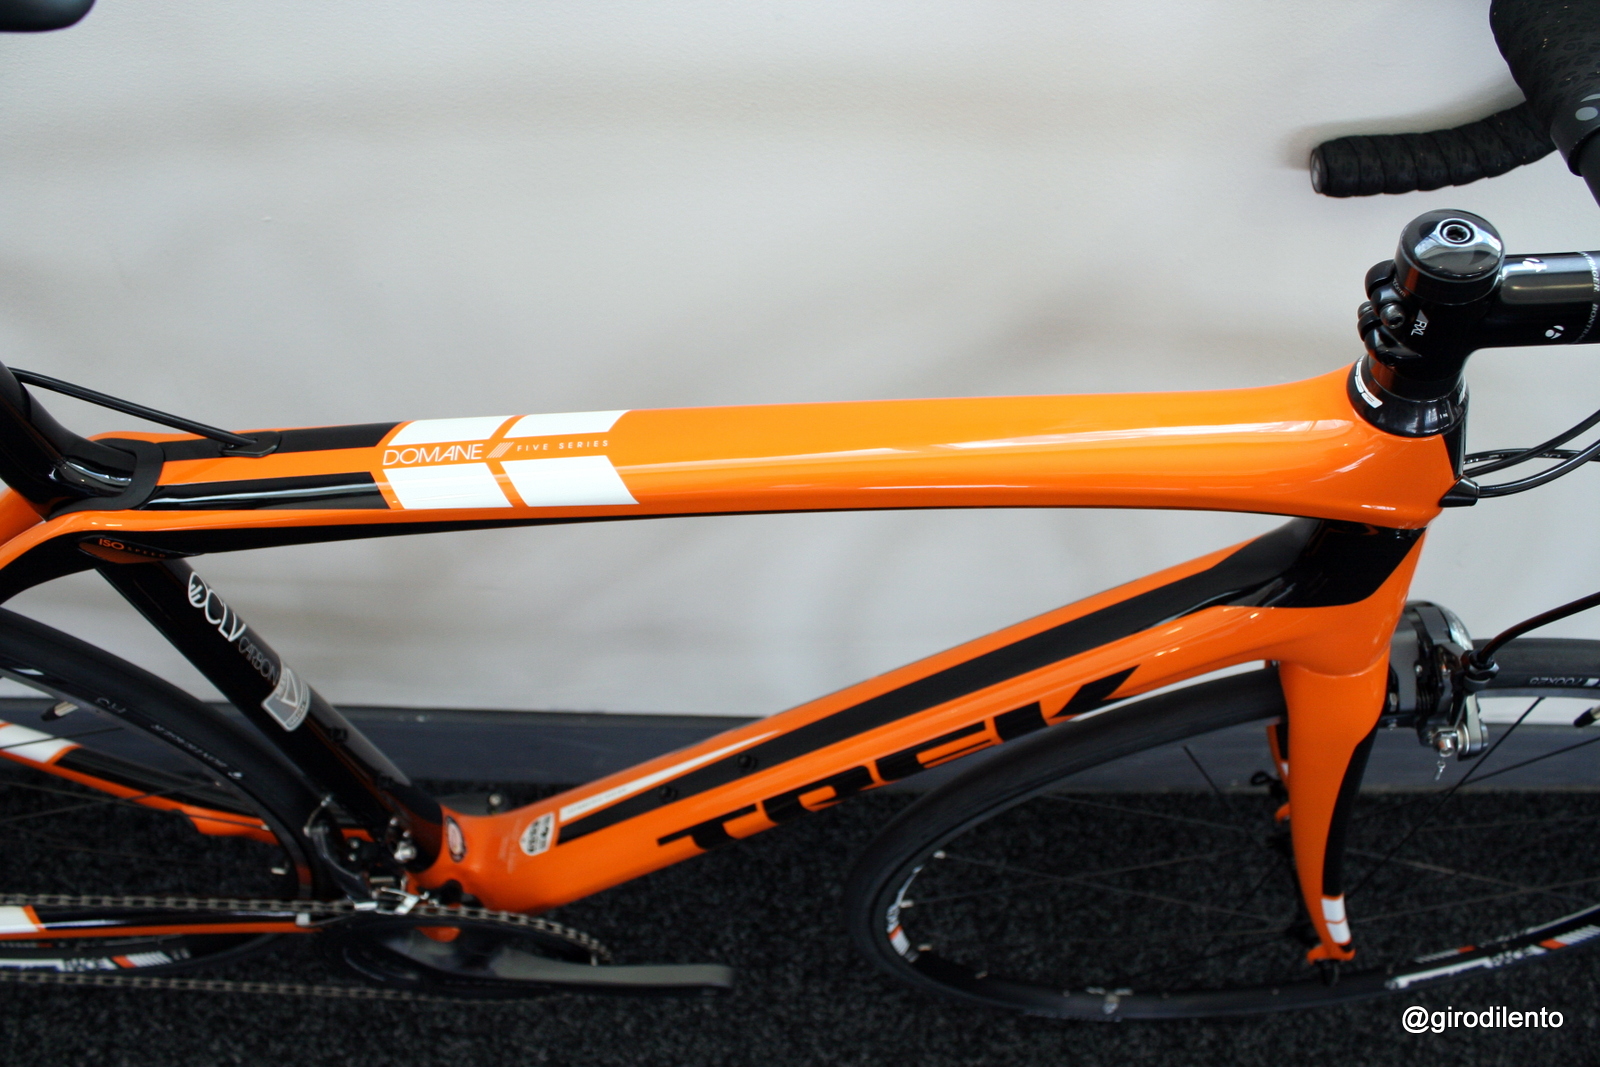 Domane 5.2 - did I mention I love that orange? Looks even better in the flesh